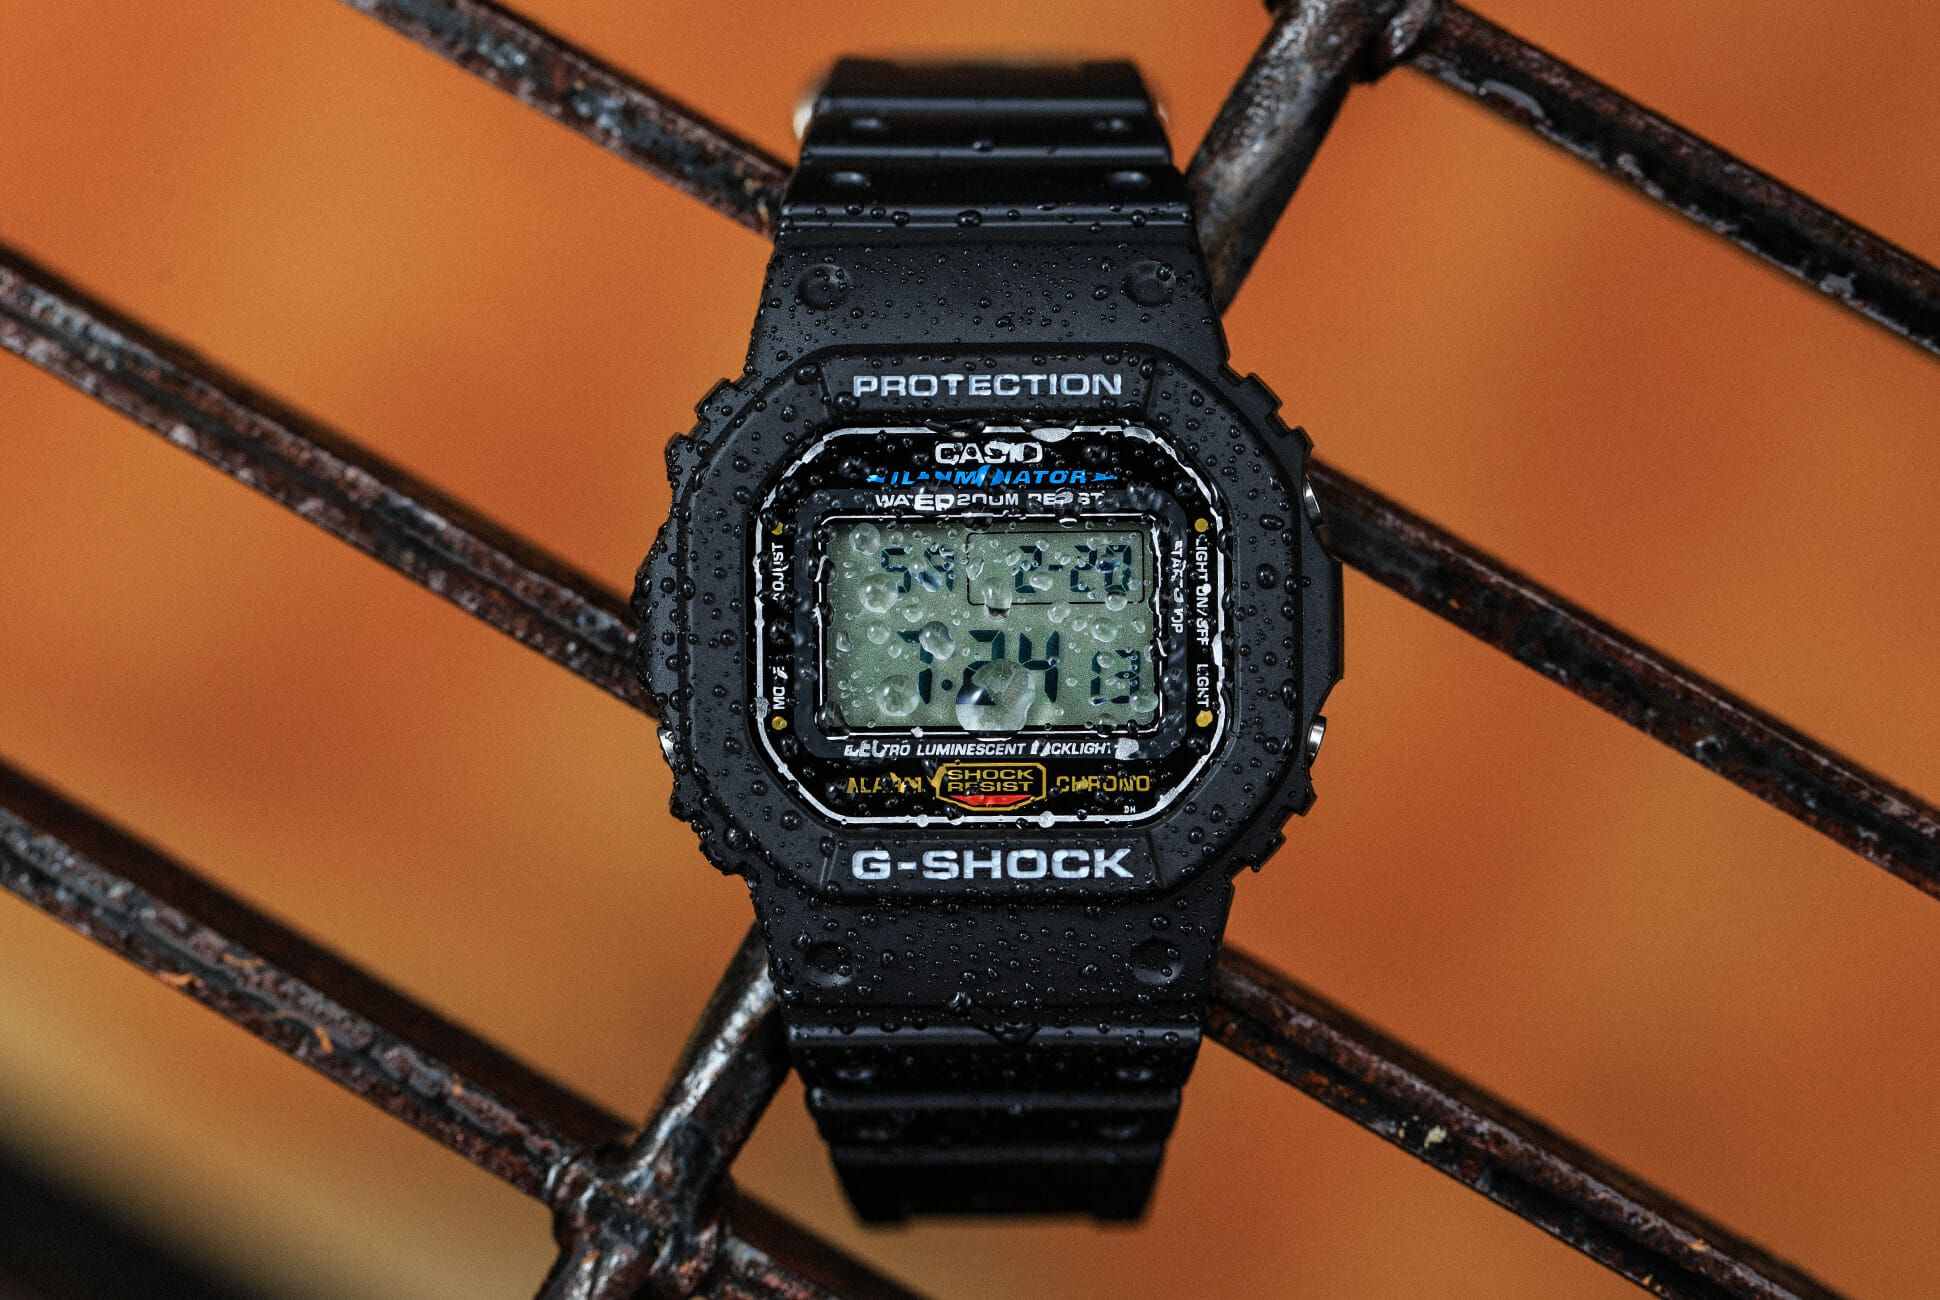 Sprællemand makeup kromatisk G-Shock DW-5600E Review: Just How Tough Is a $40 Plastic Watch?